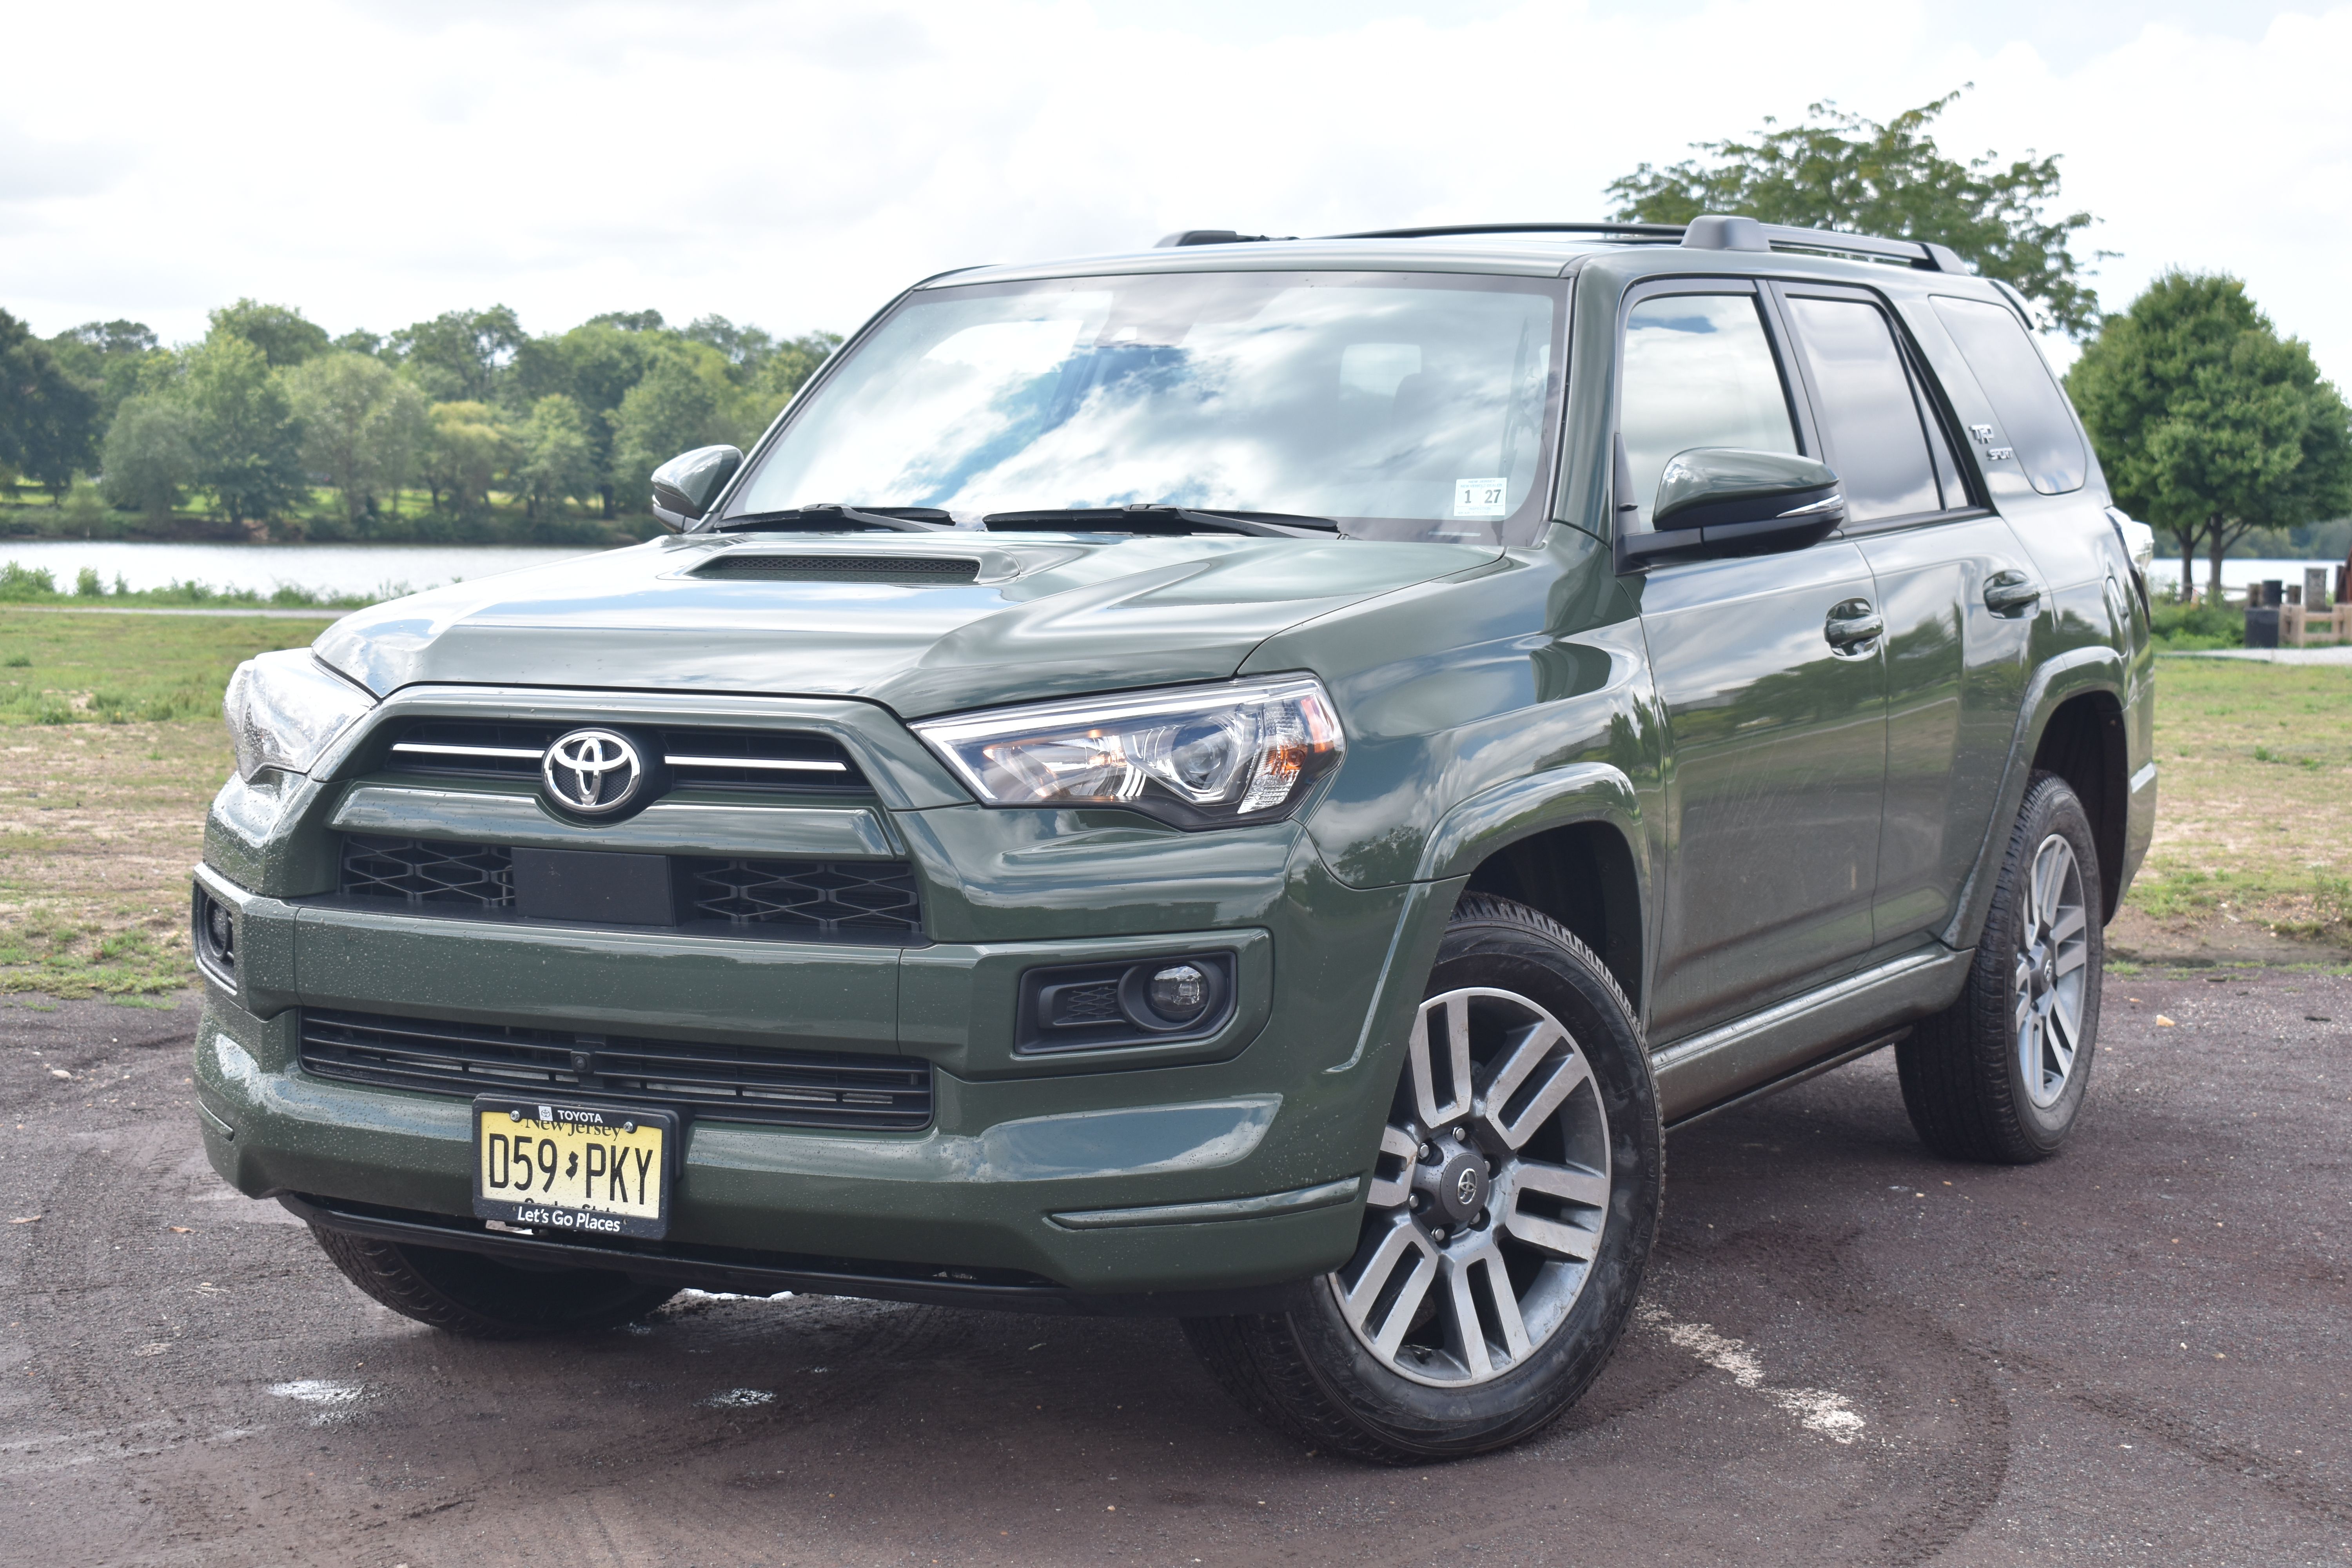 2022 Toyota 4Runner TRD Sport Review: A Big SUV For The Family